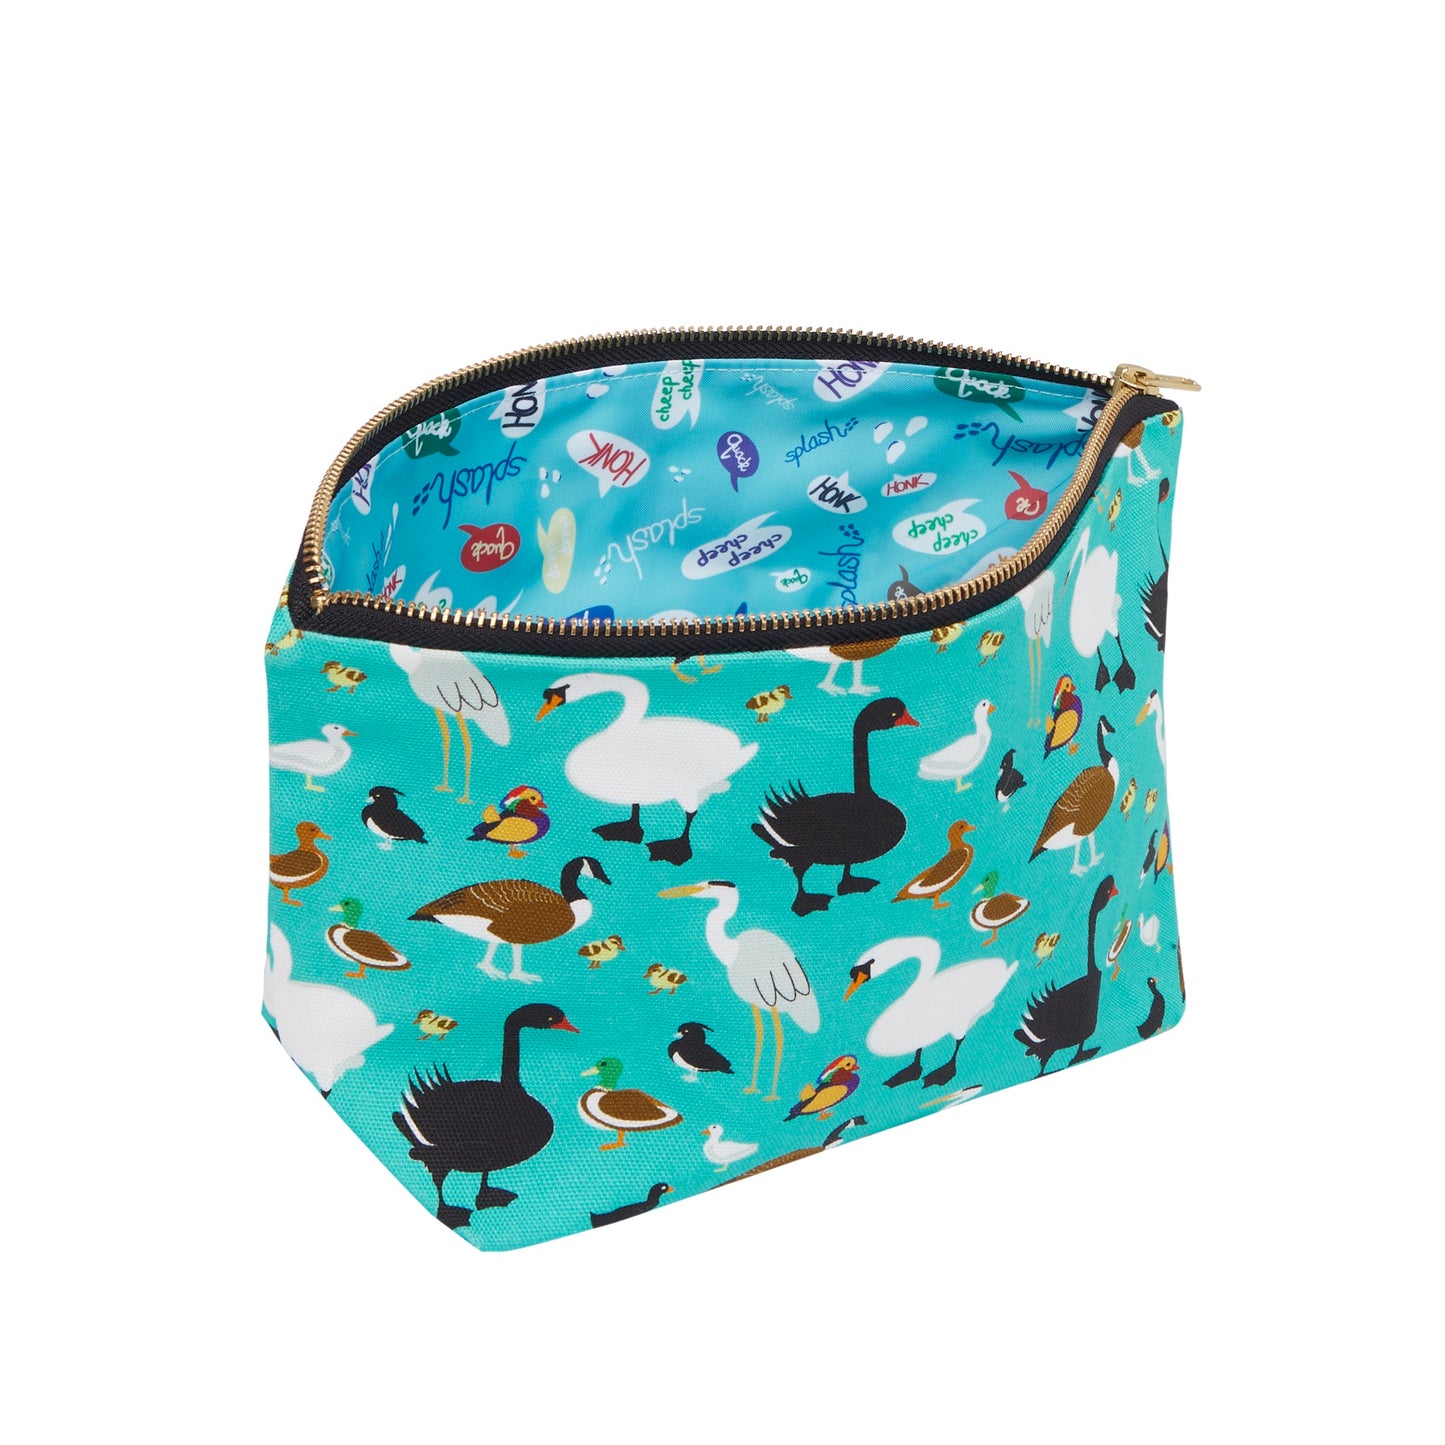 Duck bag with zipped closure . Organic cotton with printed waterproof lining